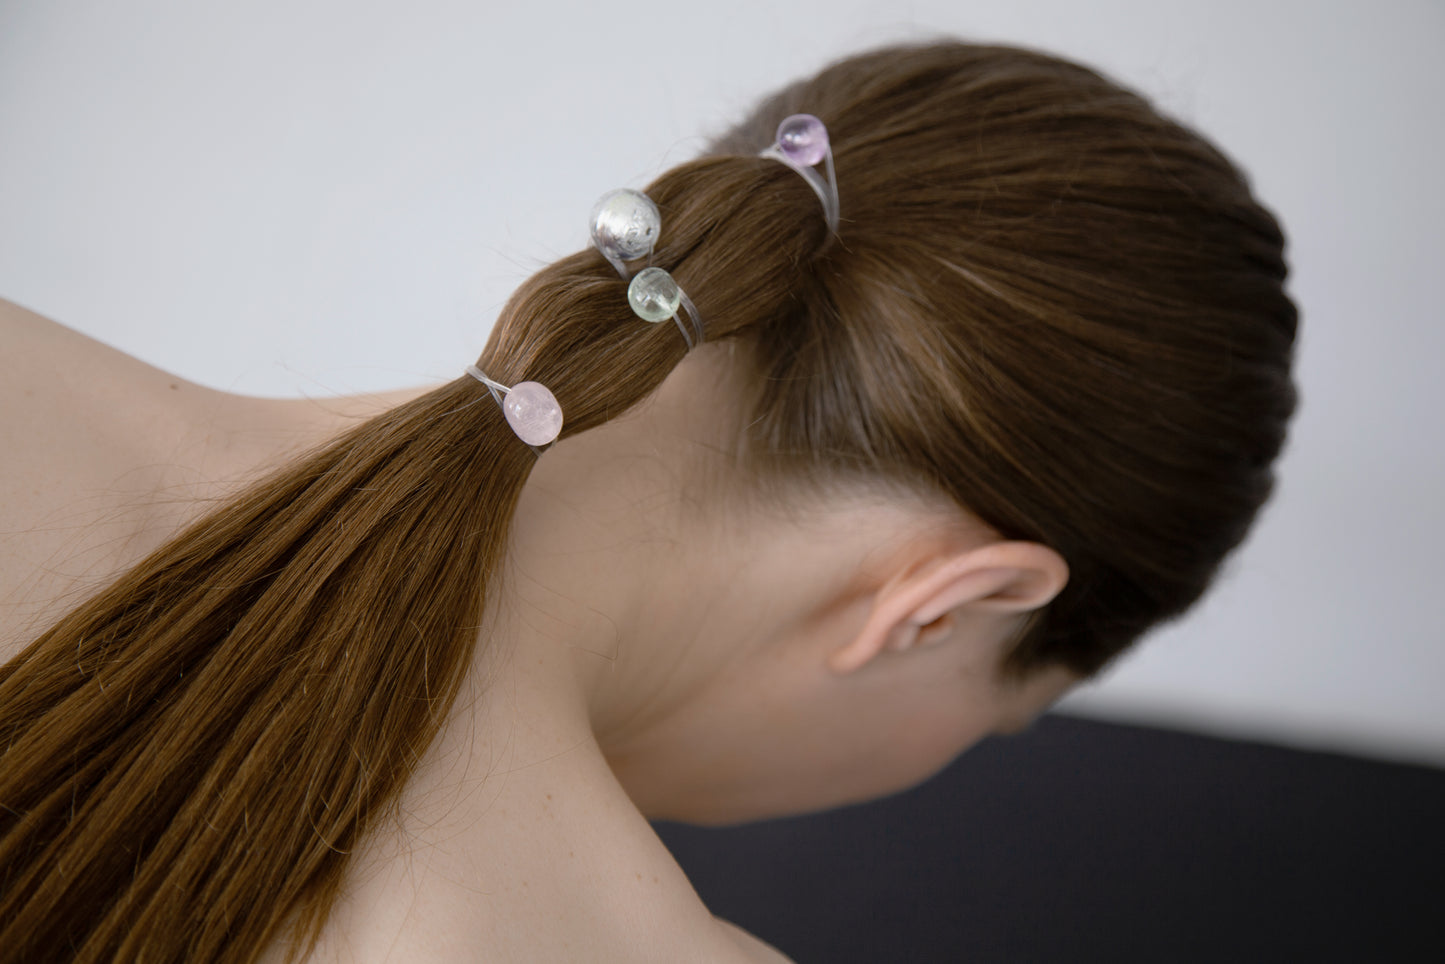 Bejeweled ponytail with minimal high-quality designer hair ties by Clinq